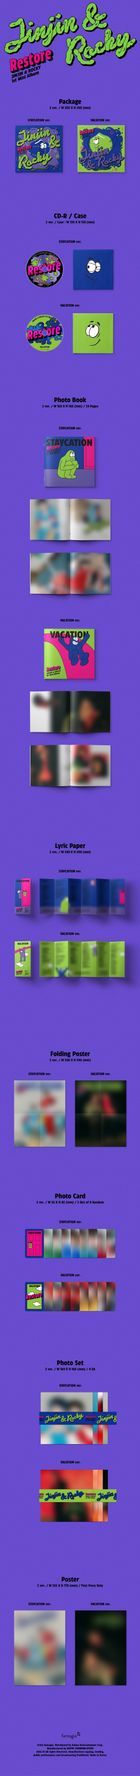 Astro: Jinjin & Rocky Mini Album Vol. 1 - Restore (Staycation + Vacation Version) + 2 Posters in Tube (Staycation + Vacation Version)